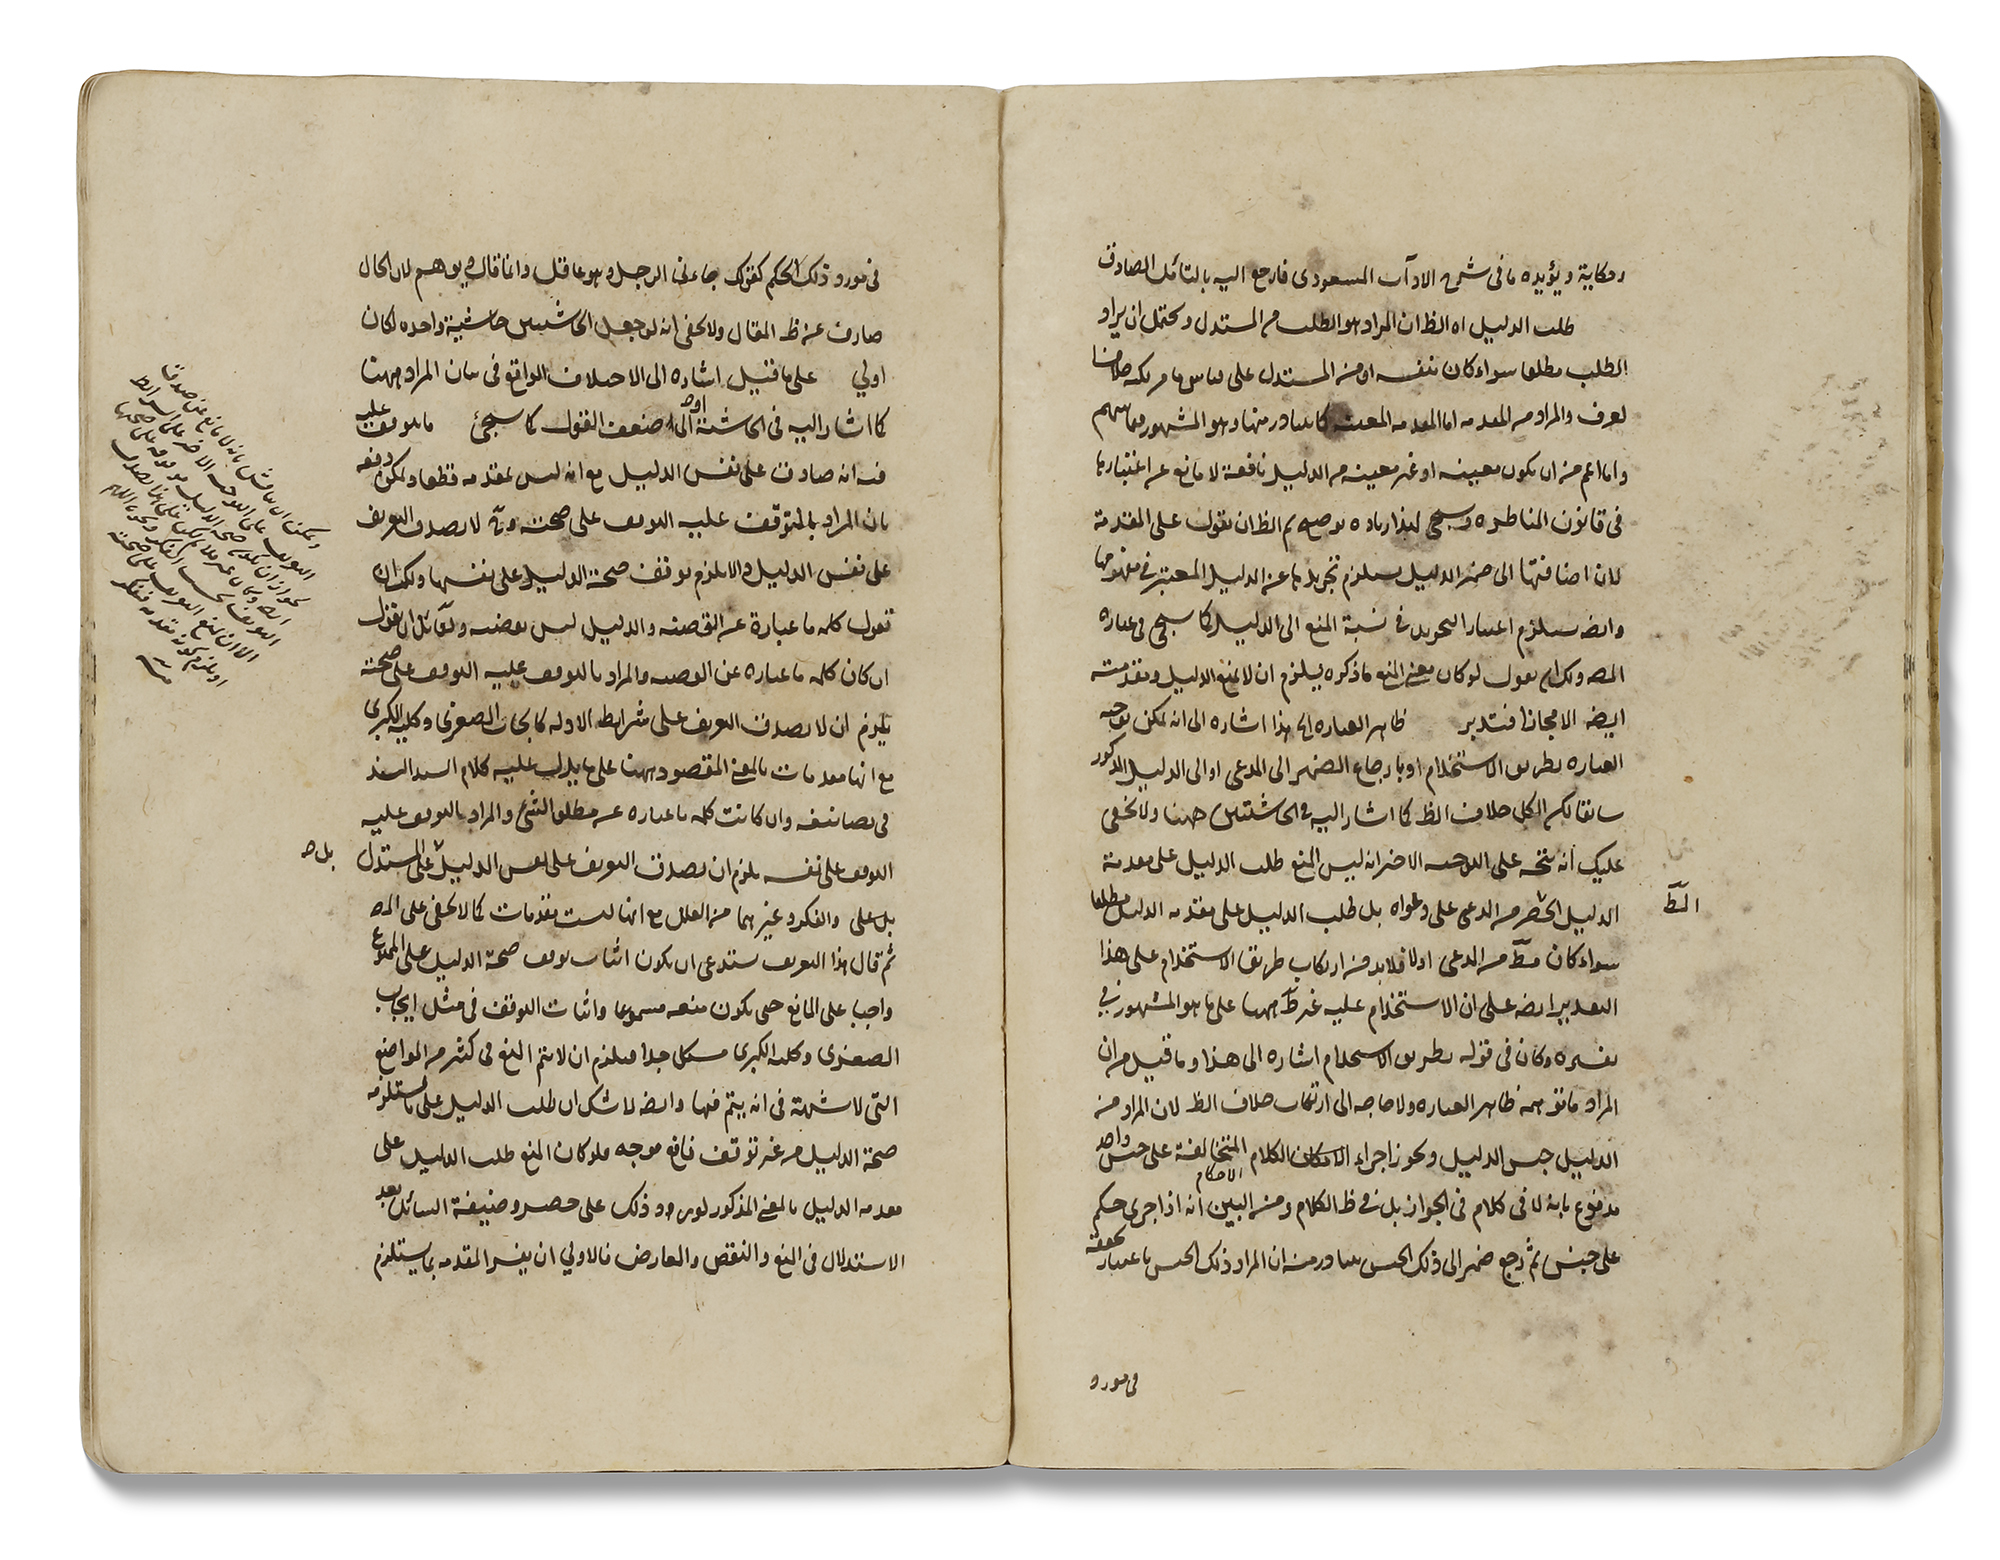 MIR ABUL FATAH IBN MIRZA MAKHDOOM AL-HUSAINI (D.974AH/ 1566AD), A TREATISE ON MATTERS CONCERNING THE - Image 3 of 8